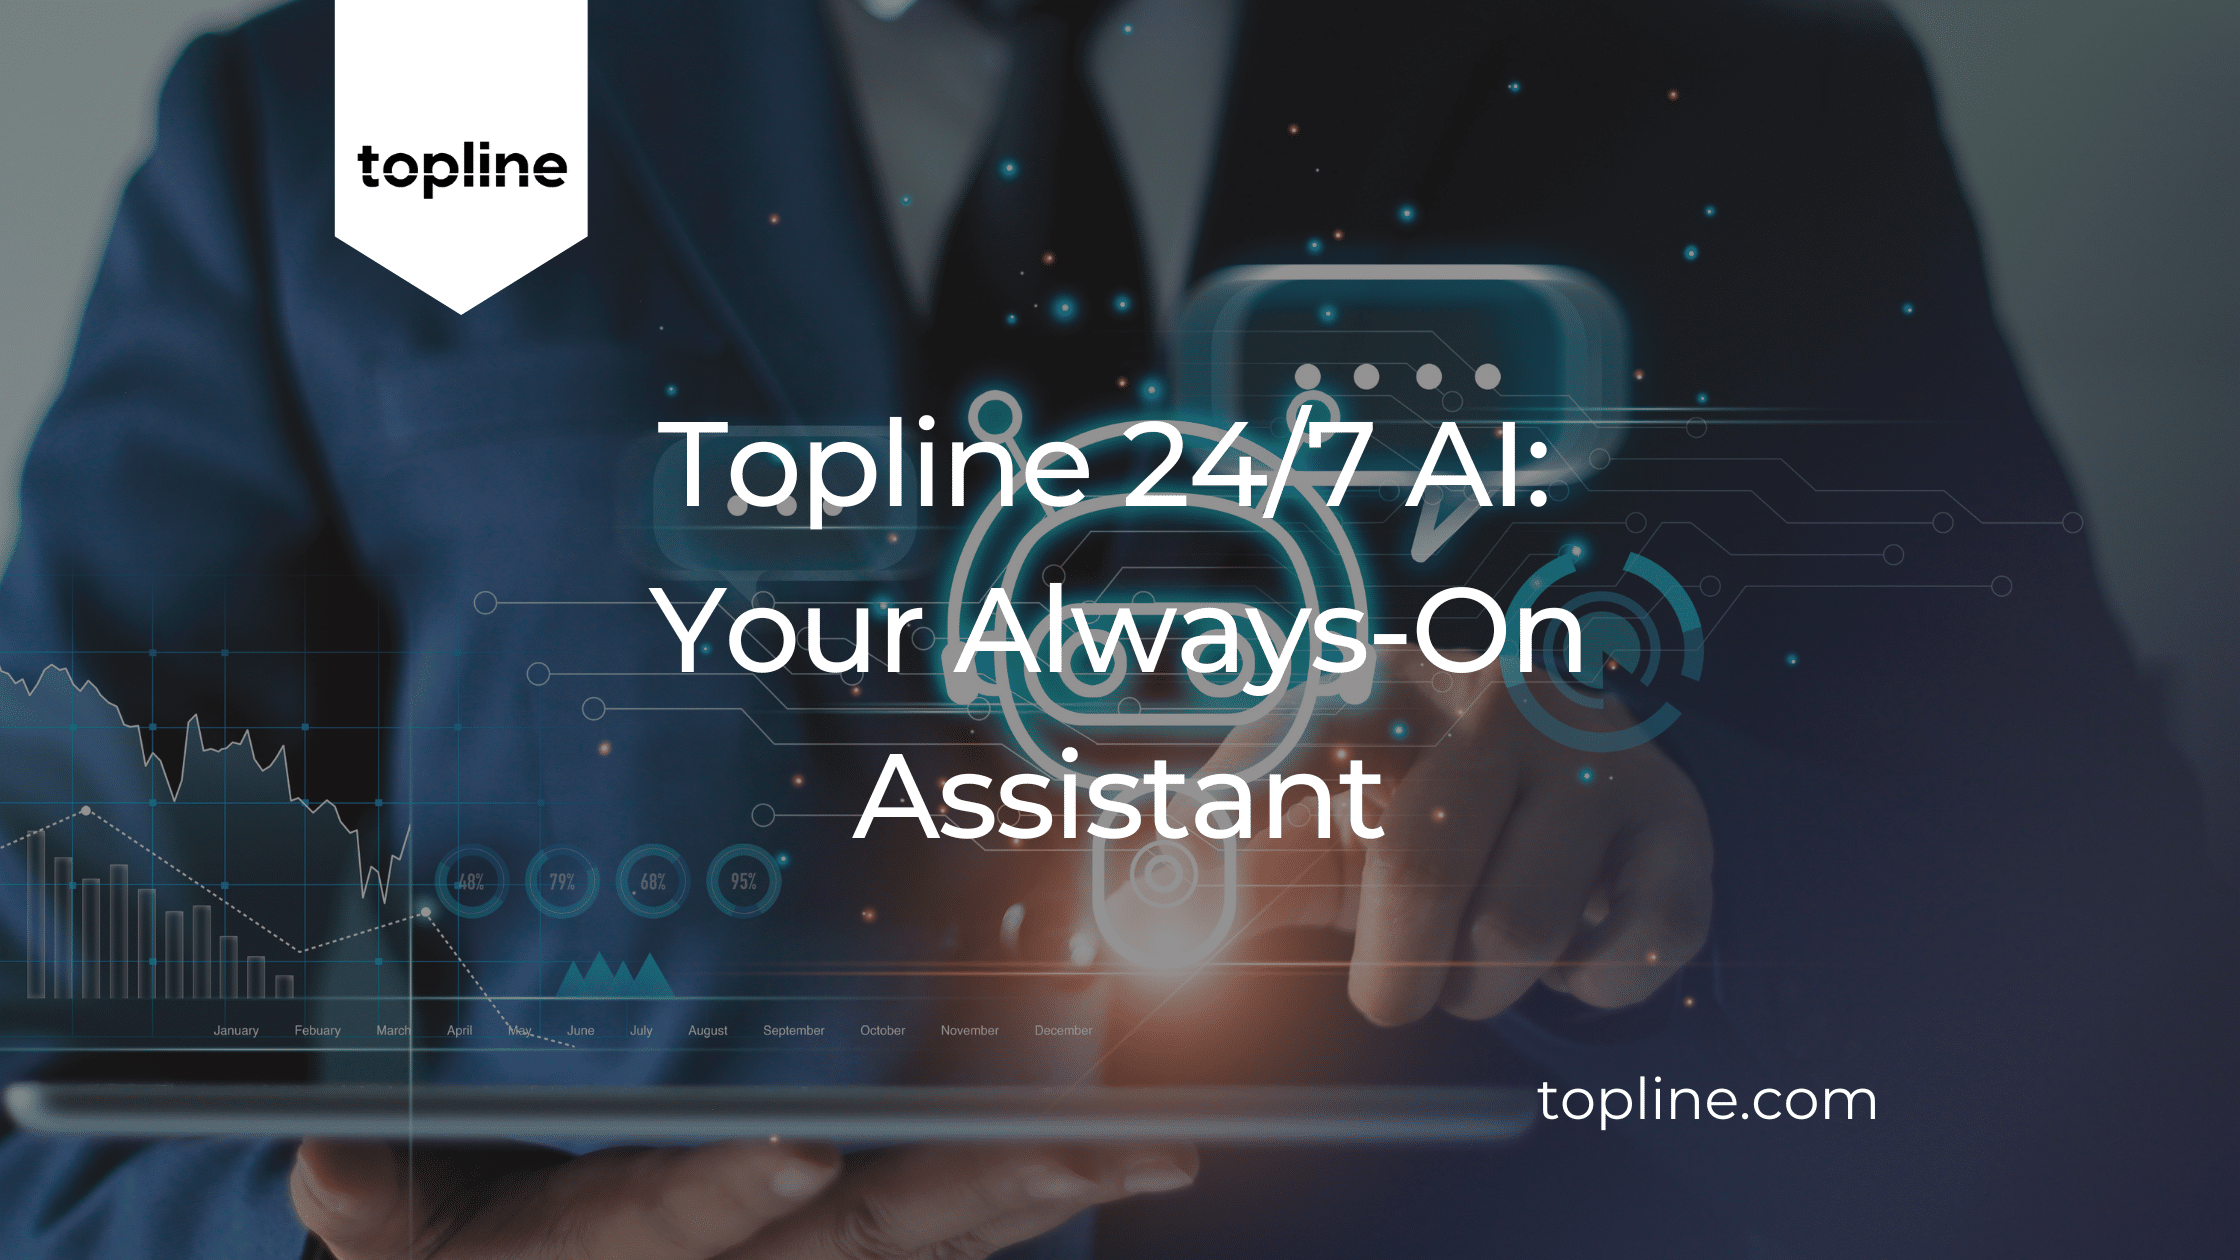 Topline 24/7 AI: Your Always-On Assistant